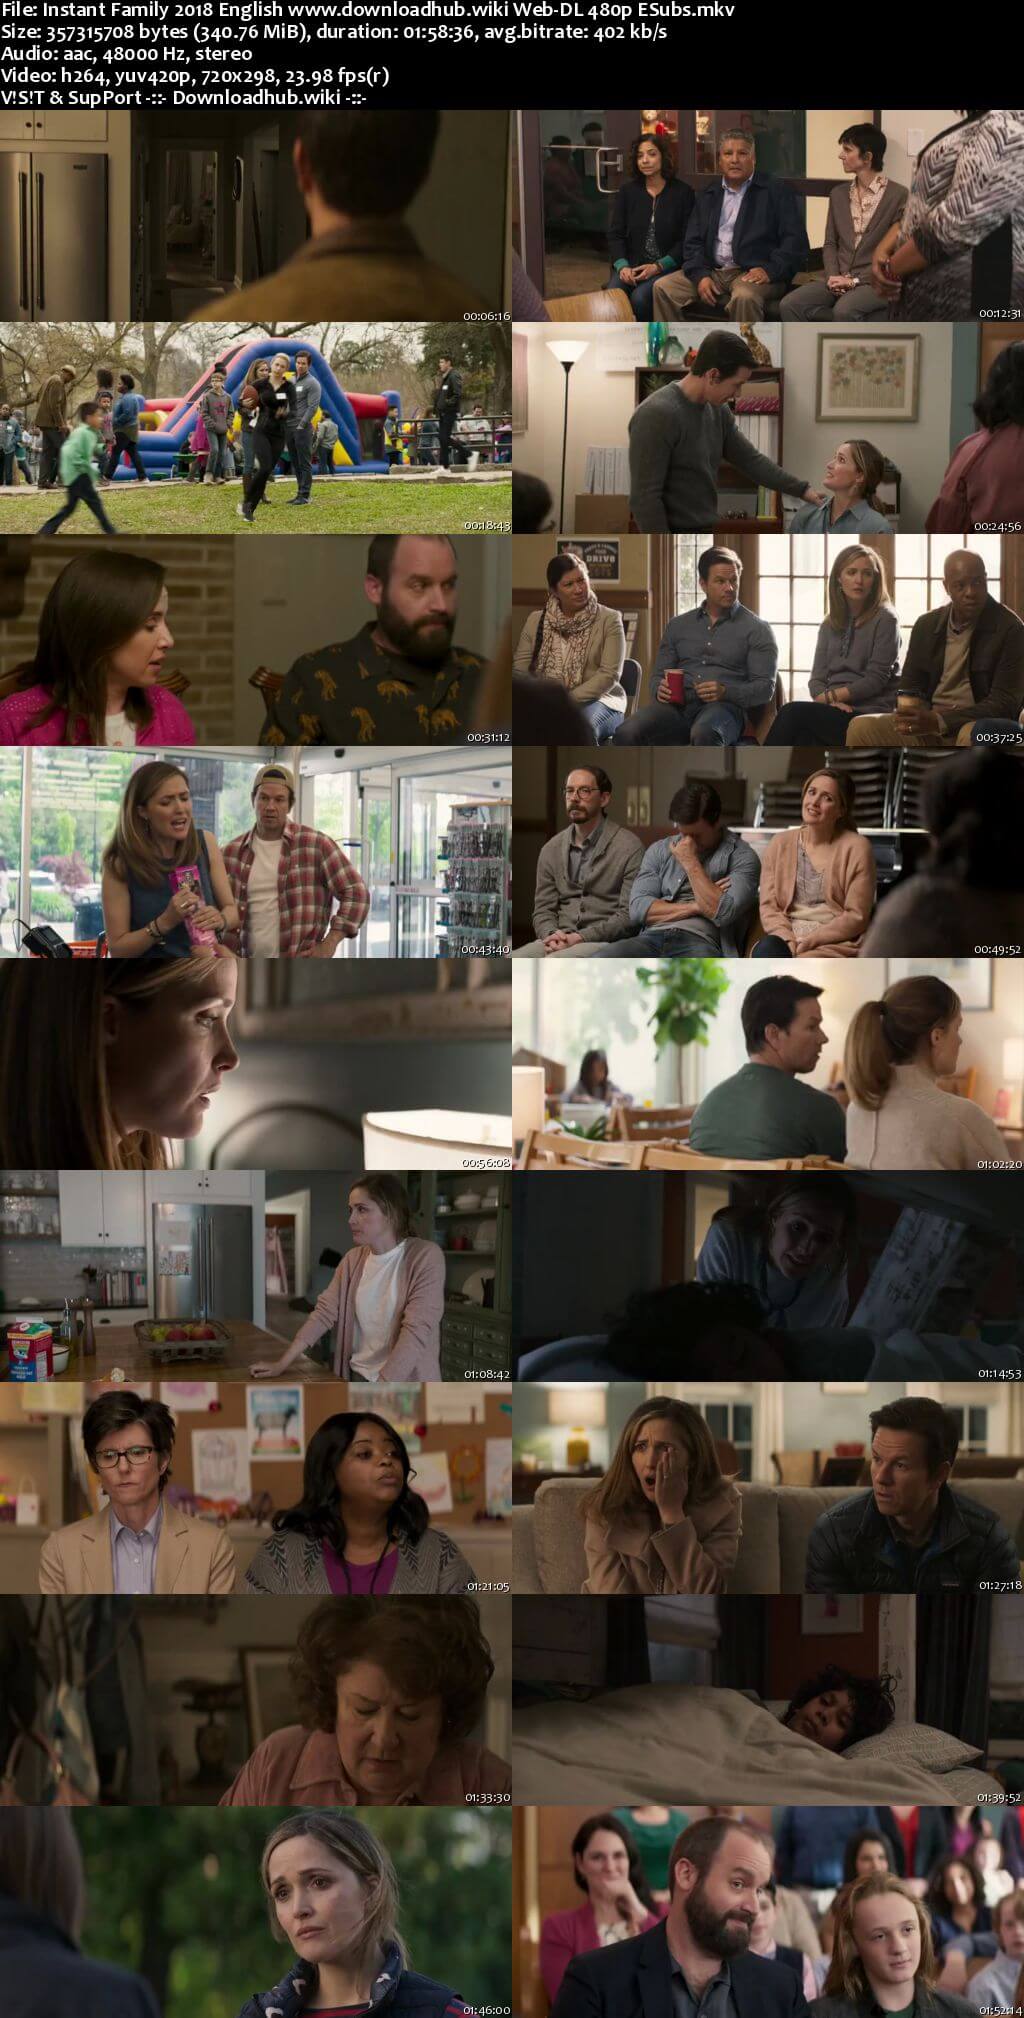 Instant Family 2018 English 300MB Web-DL 480p ESubs